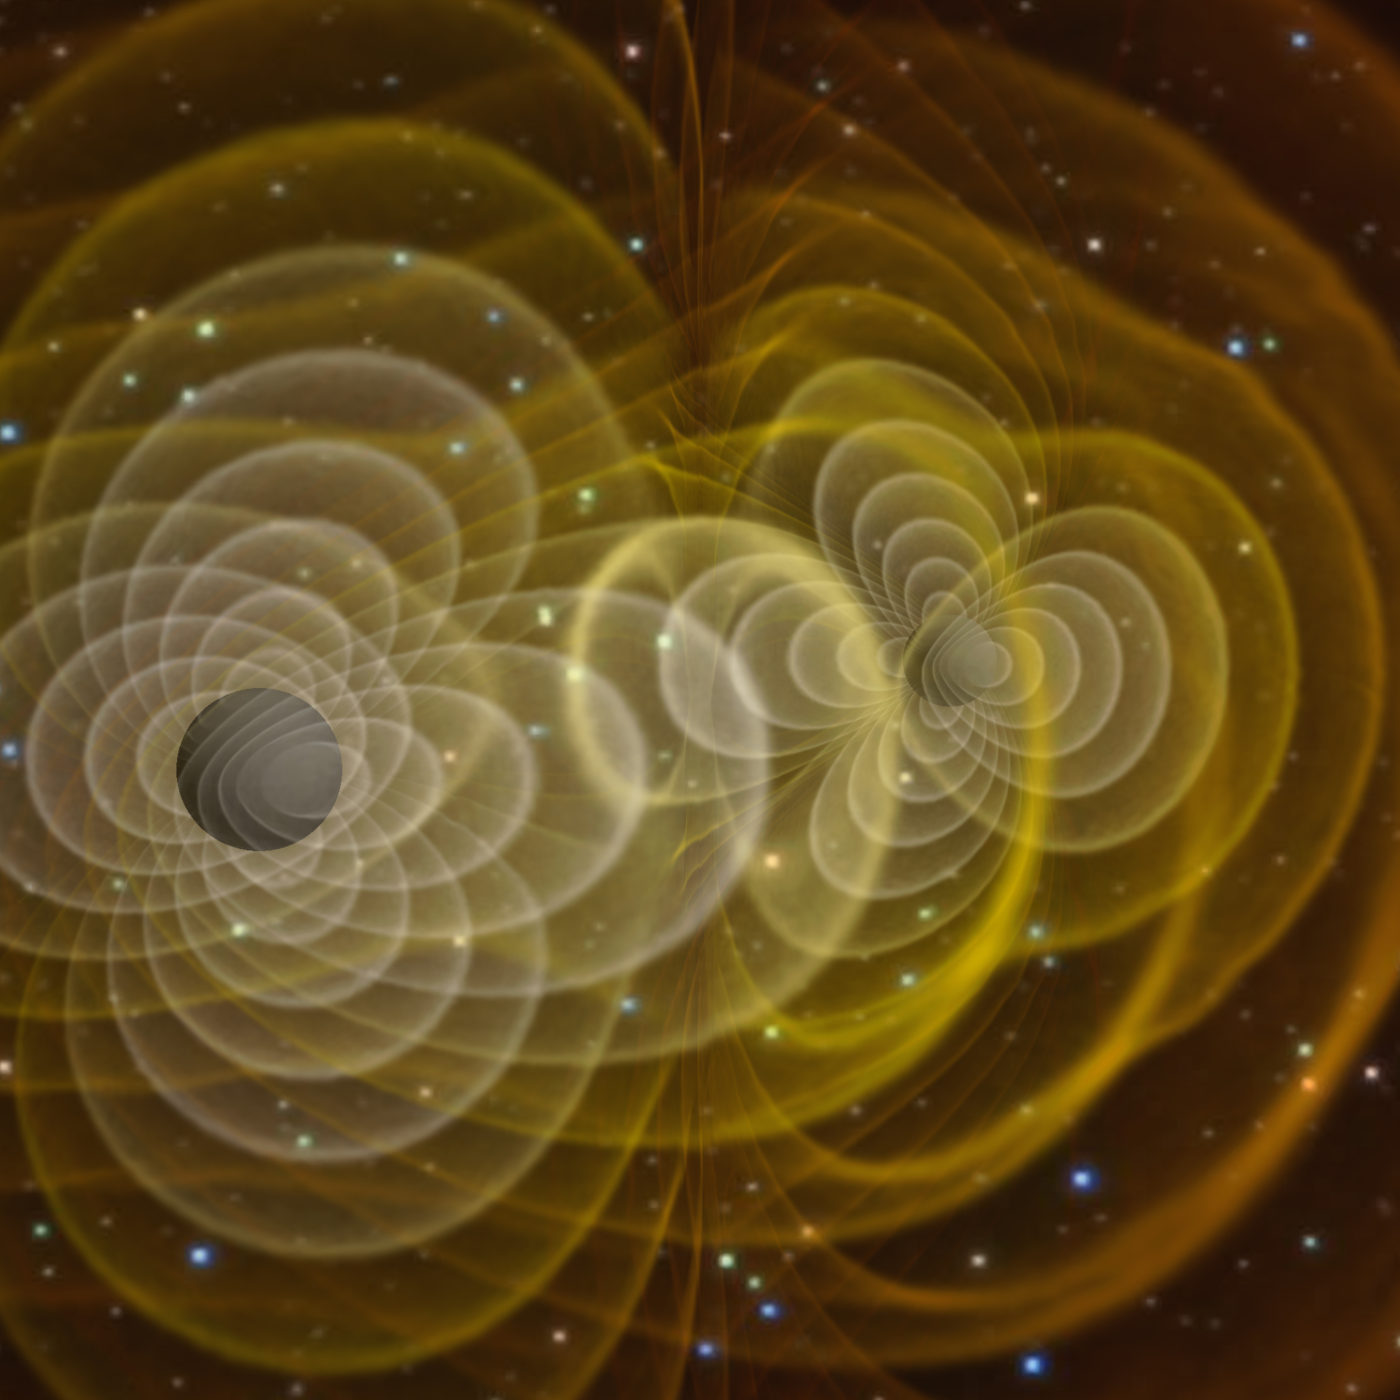 An image illustrating gravitational waves created by the collision of two black holes. Credit: Henze/NASA.